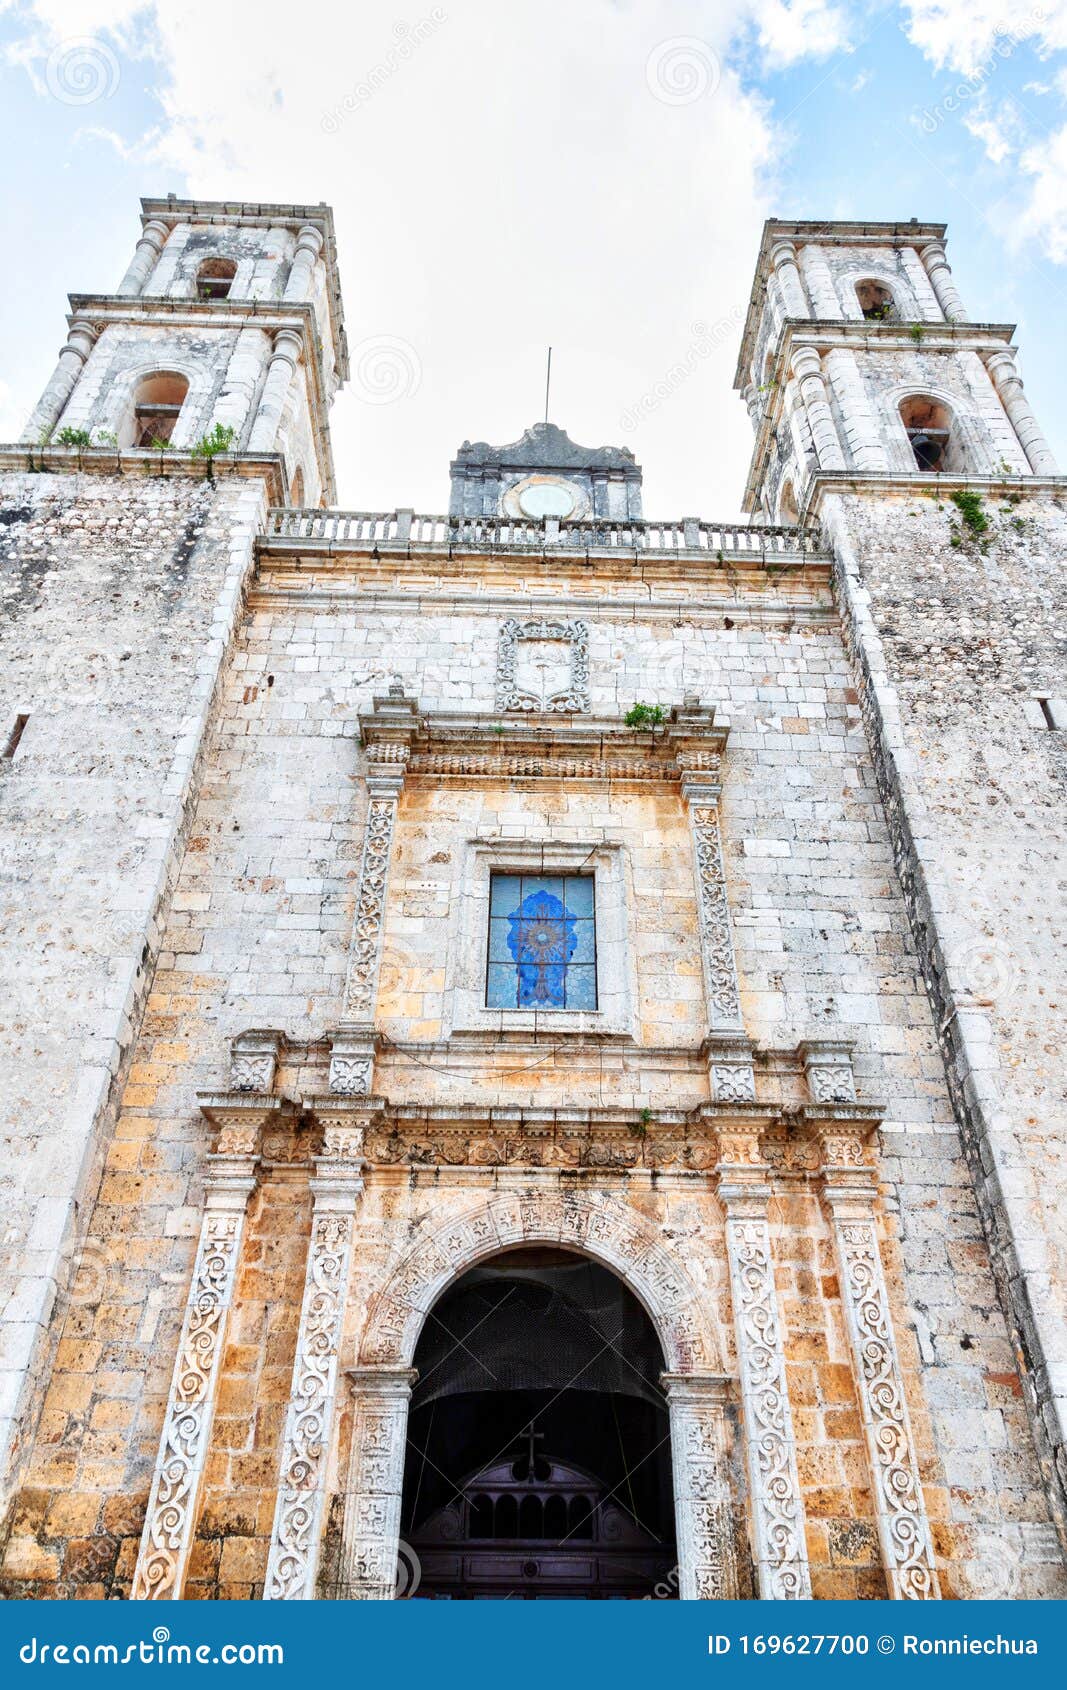 centuries-old historic cathedral of san gervasio church in valladolid, mexico